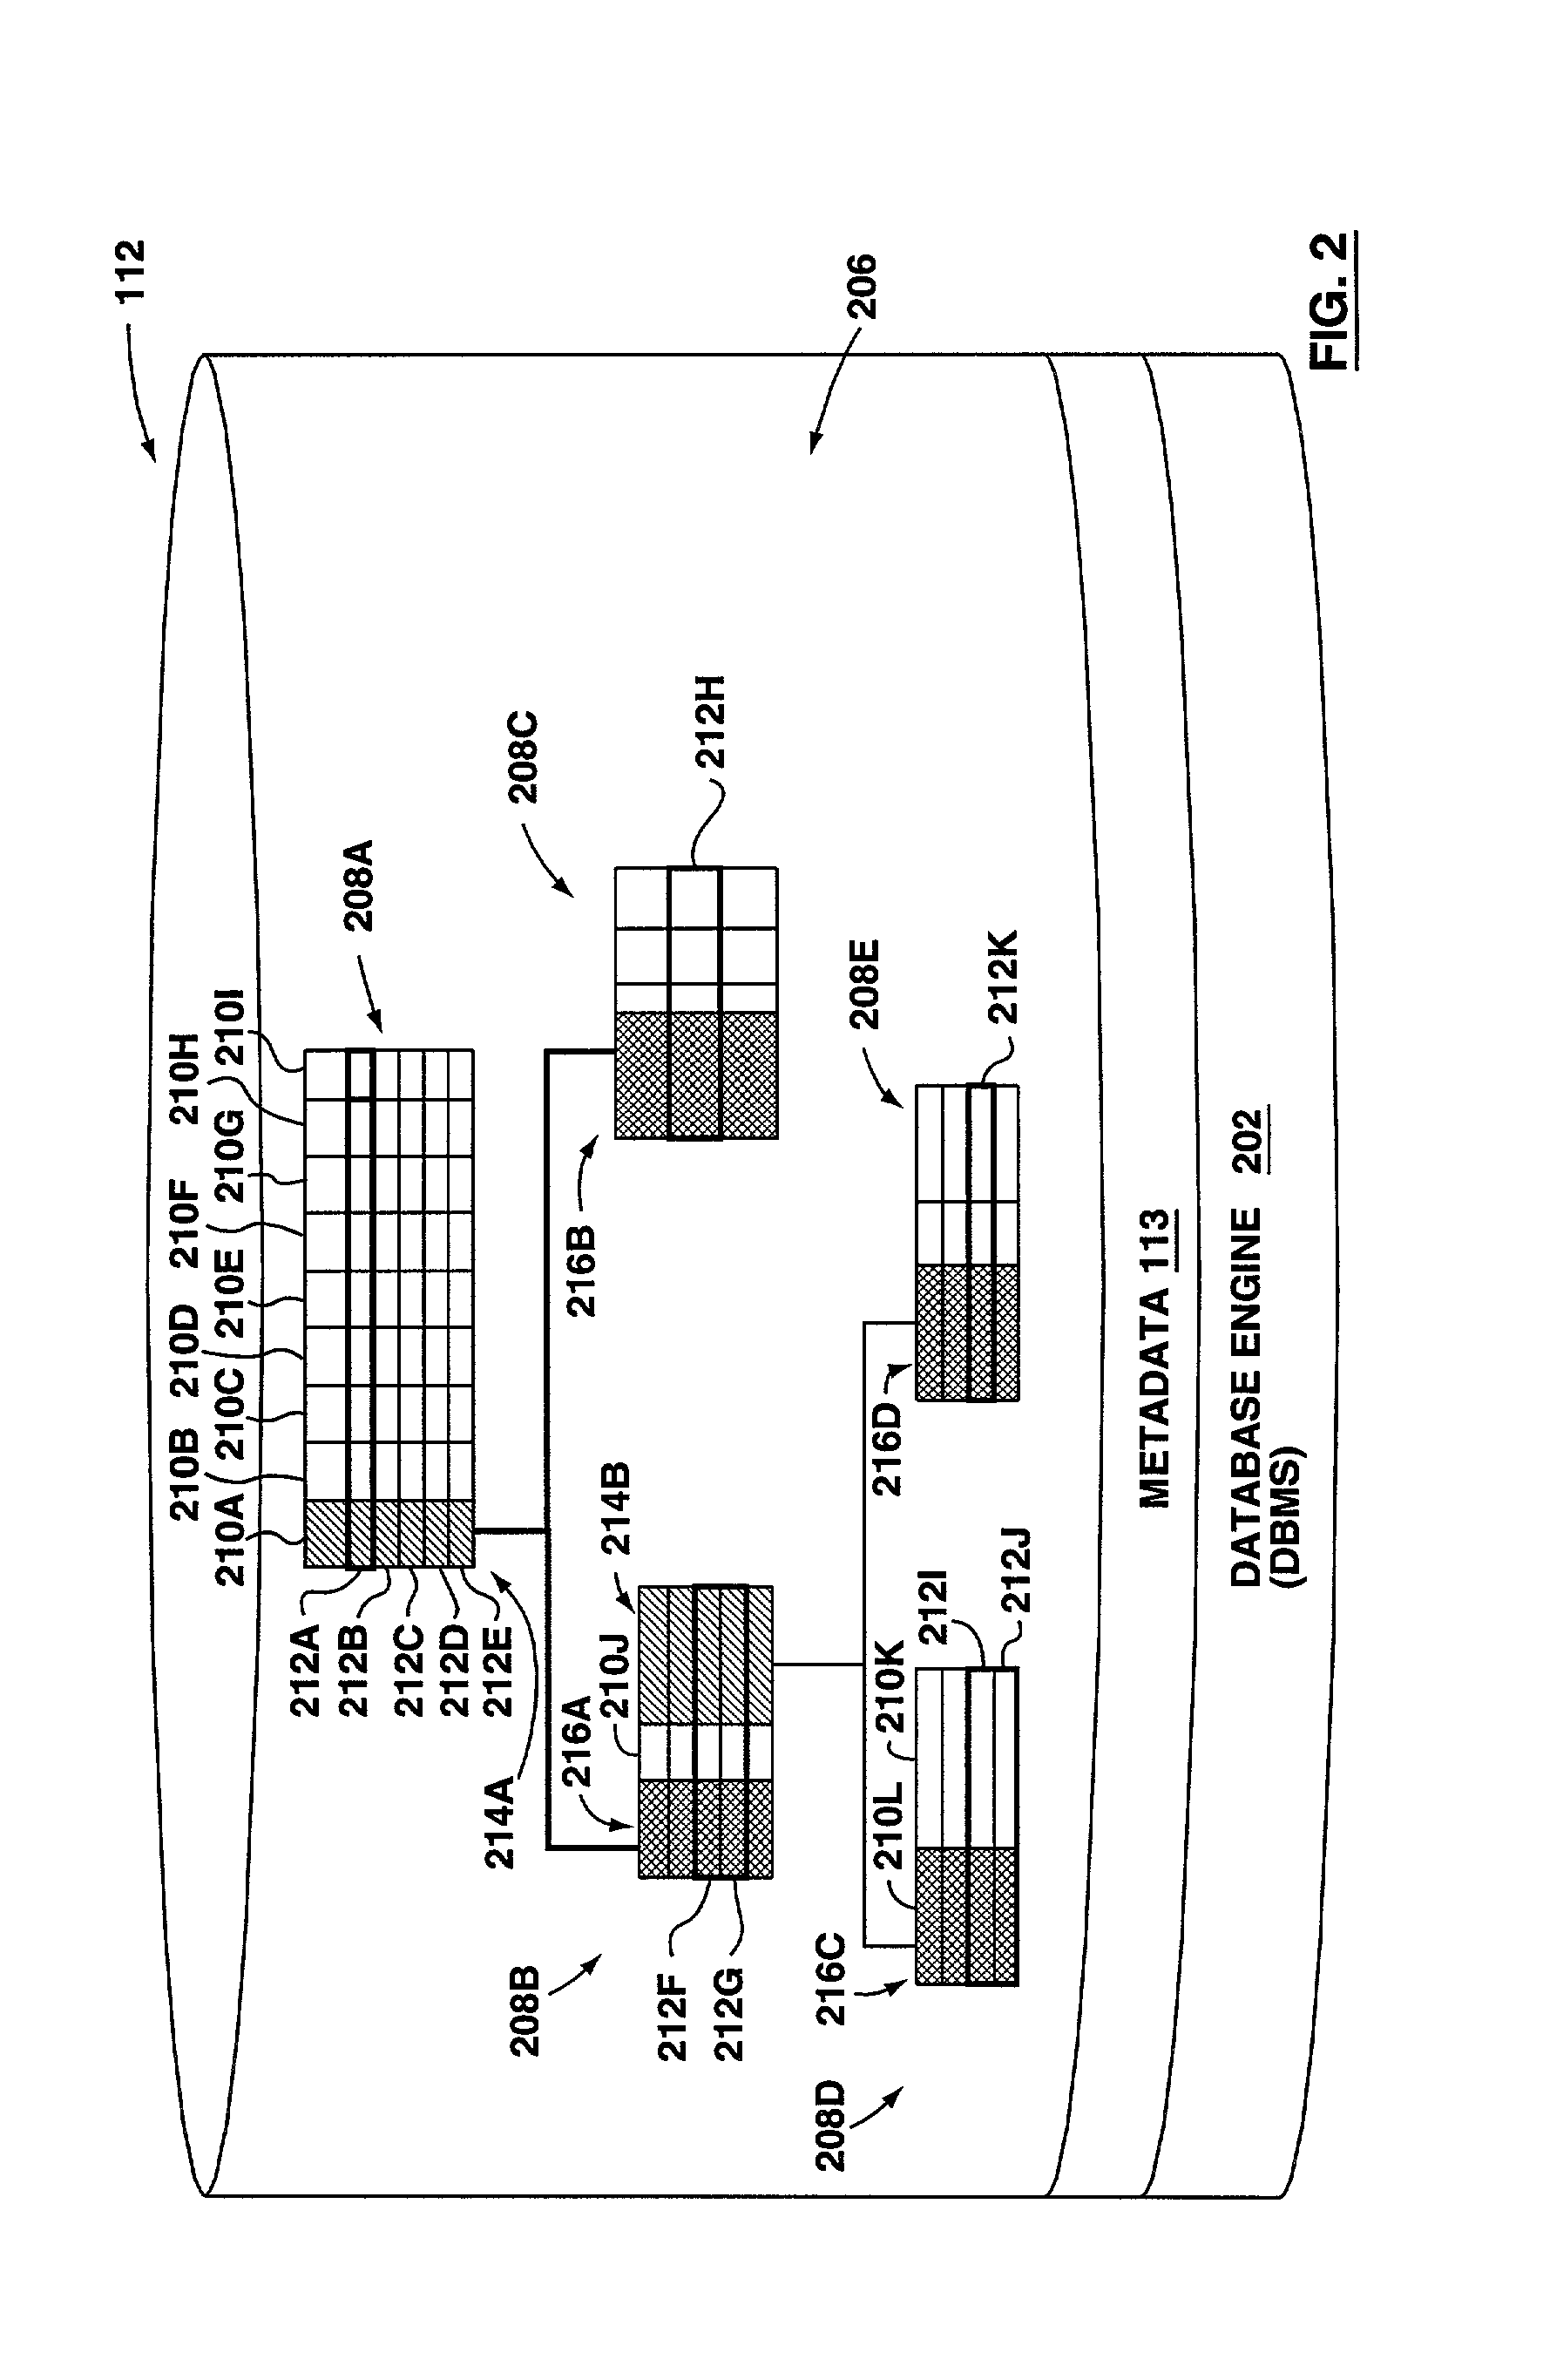 Method and apparatus for deleting data in a database